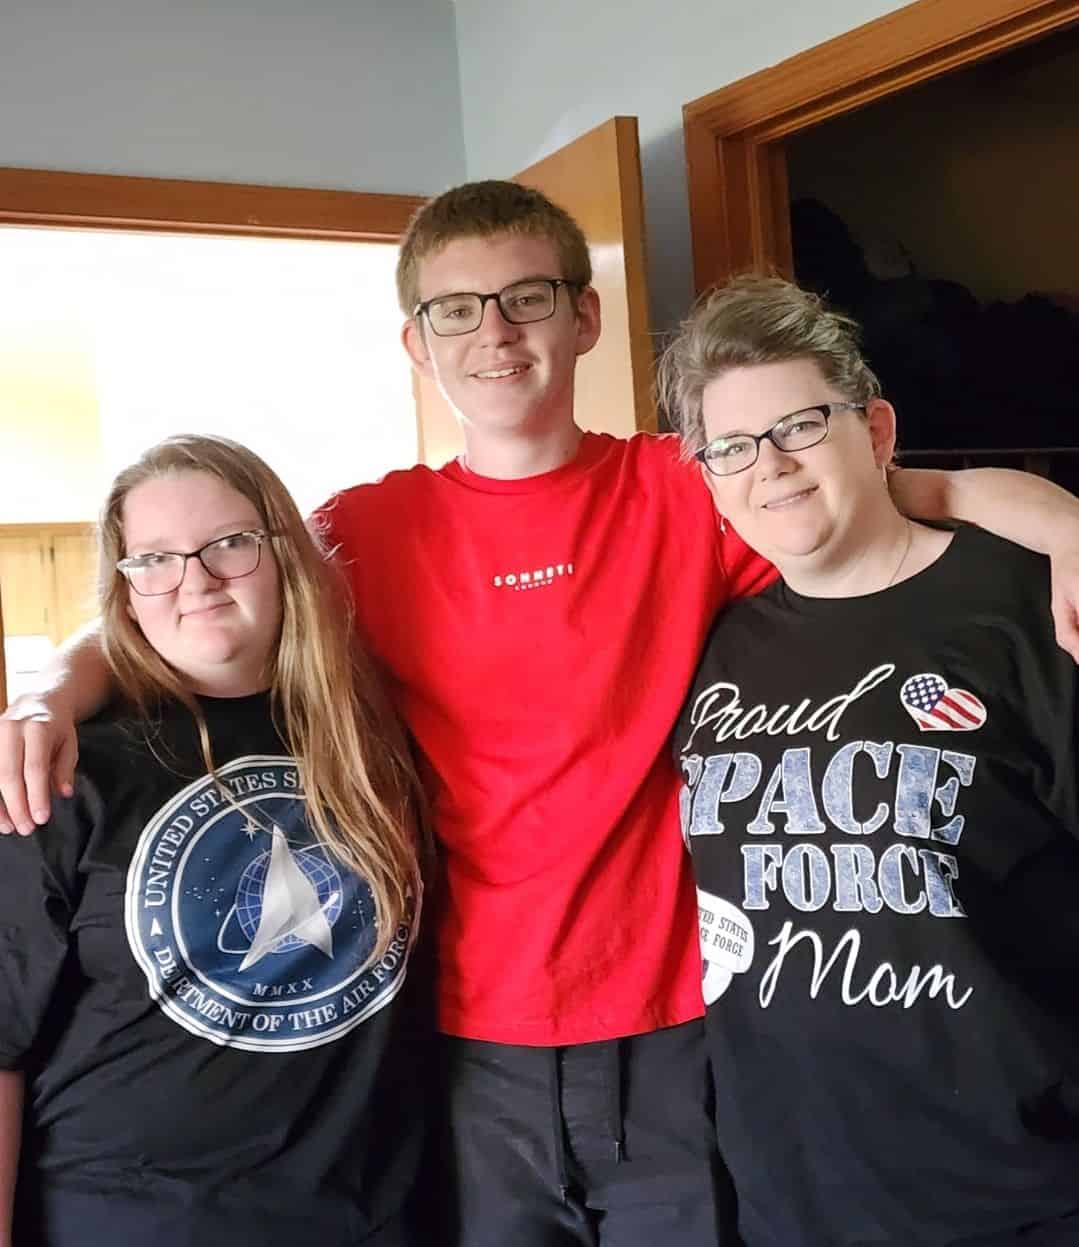 Hunter (middle), his sister Payton (left), and mother Kimberly Gloetzner (right) pose for a picture. [Photo credit: David Gloetzner]